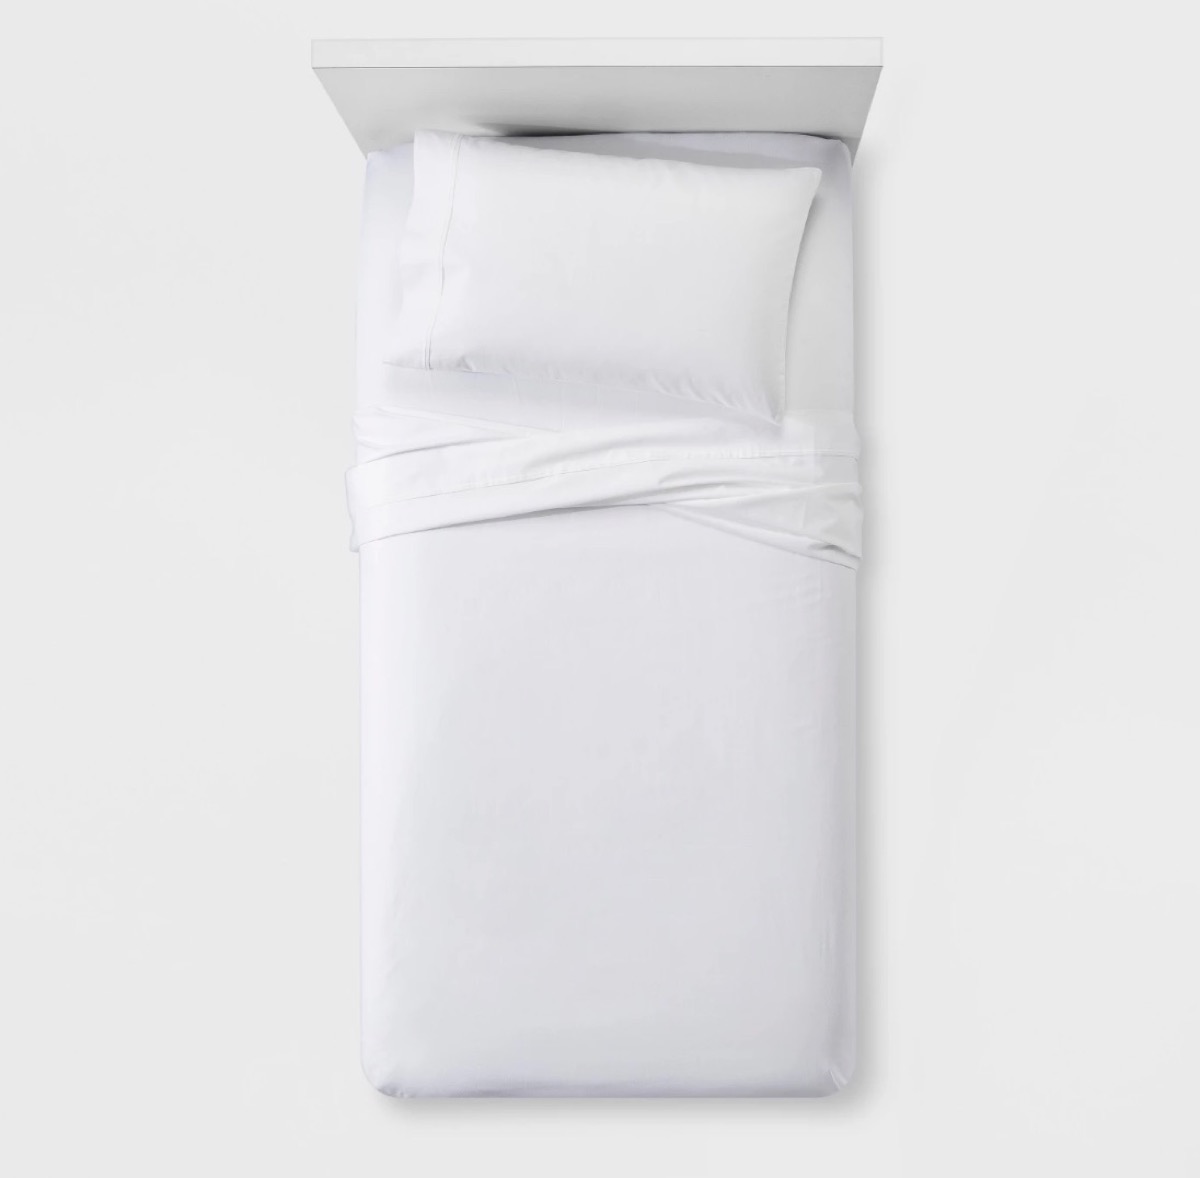 white sheets on a twin bed